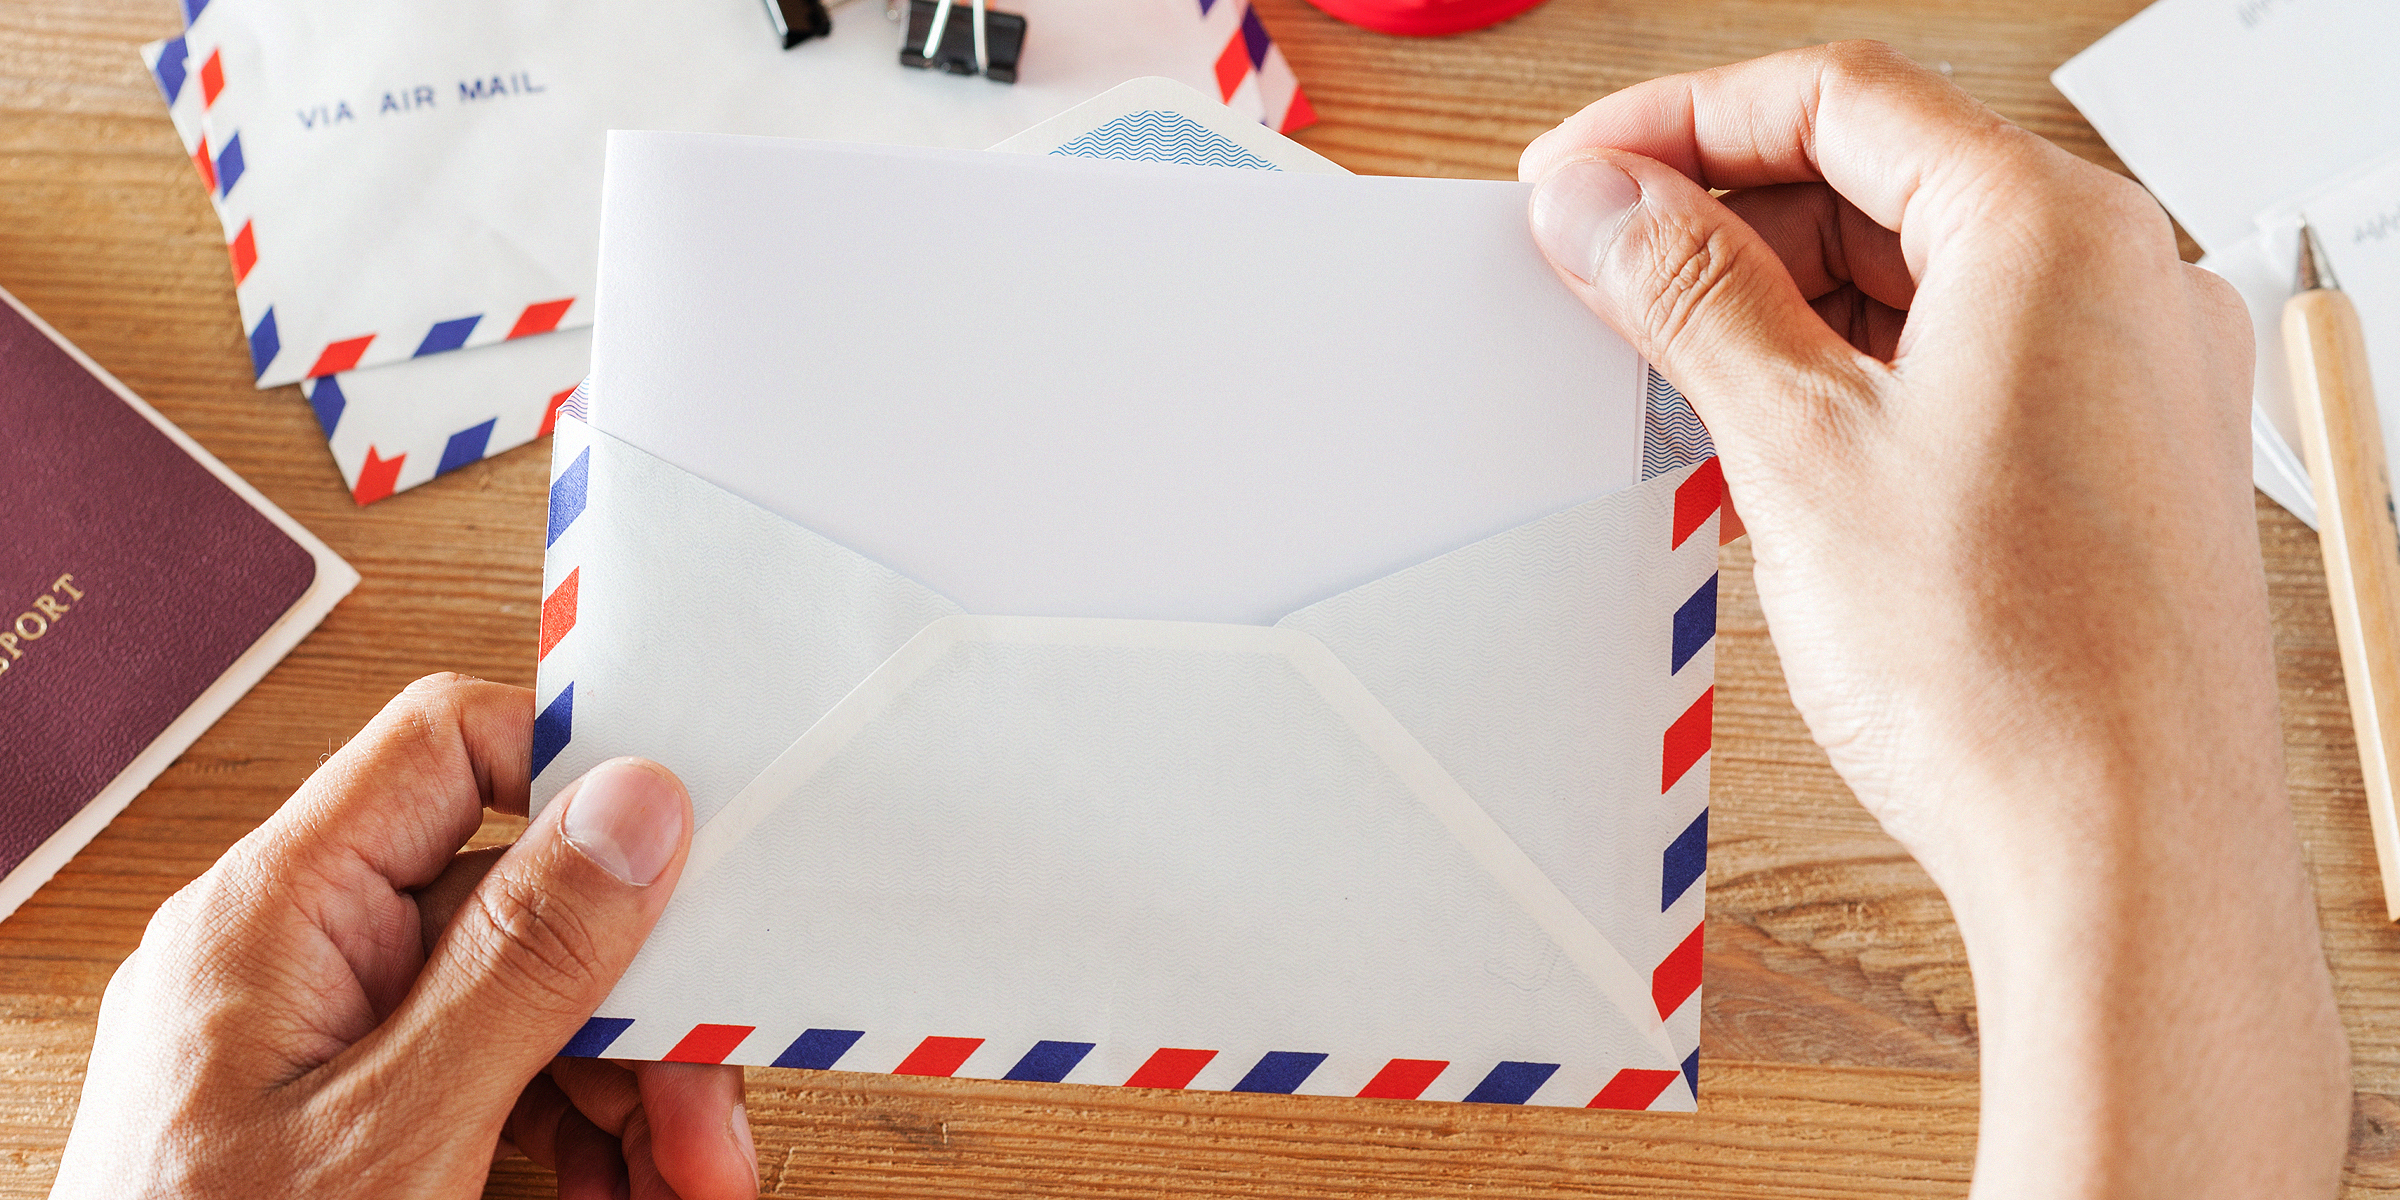 Person holding an envelope | Source: Shutterstock